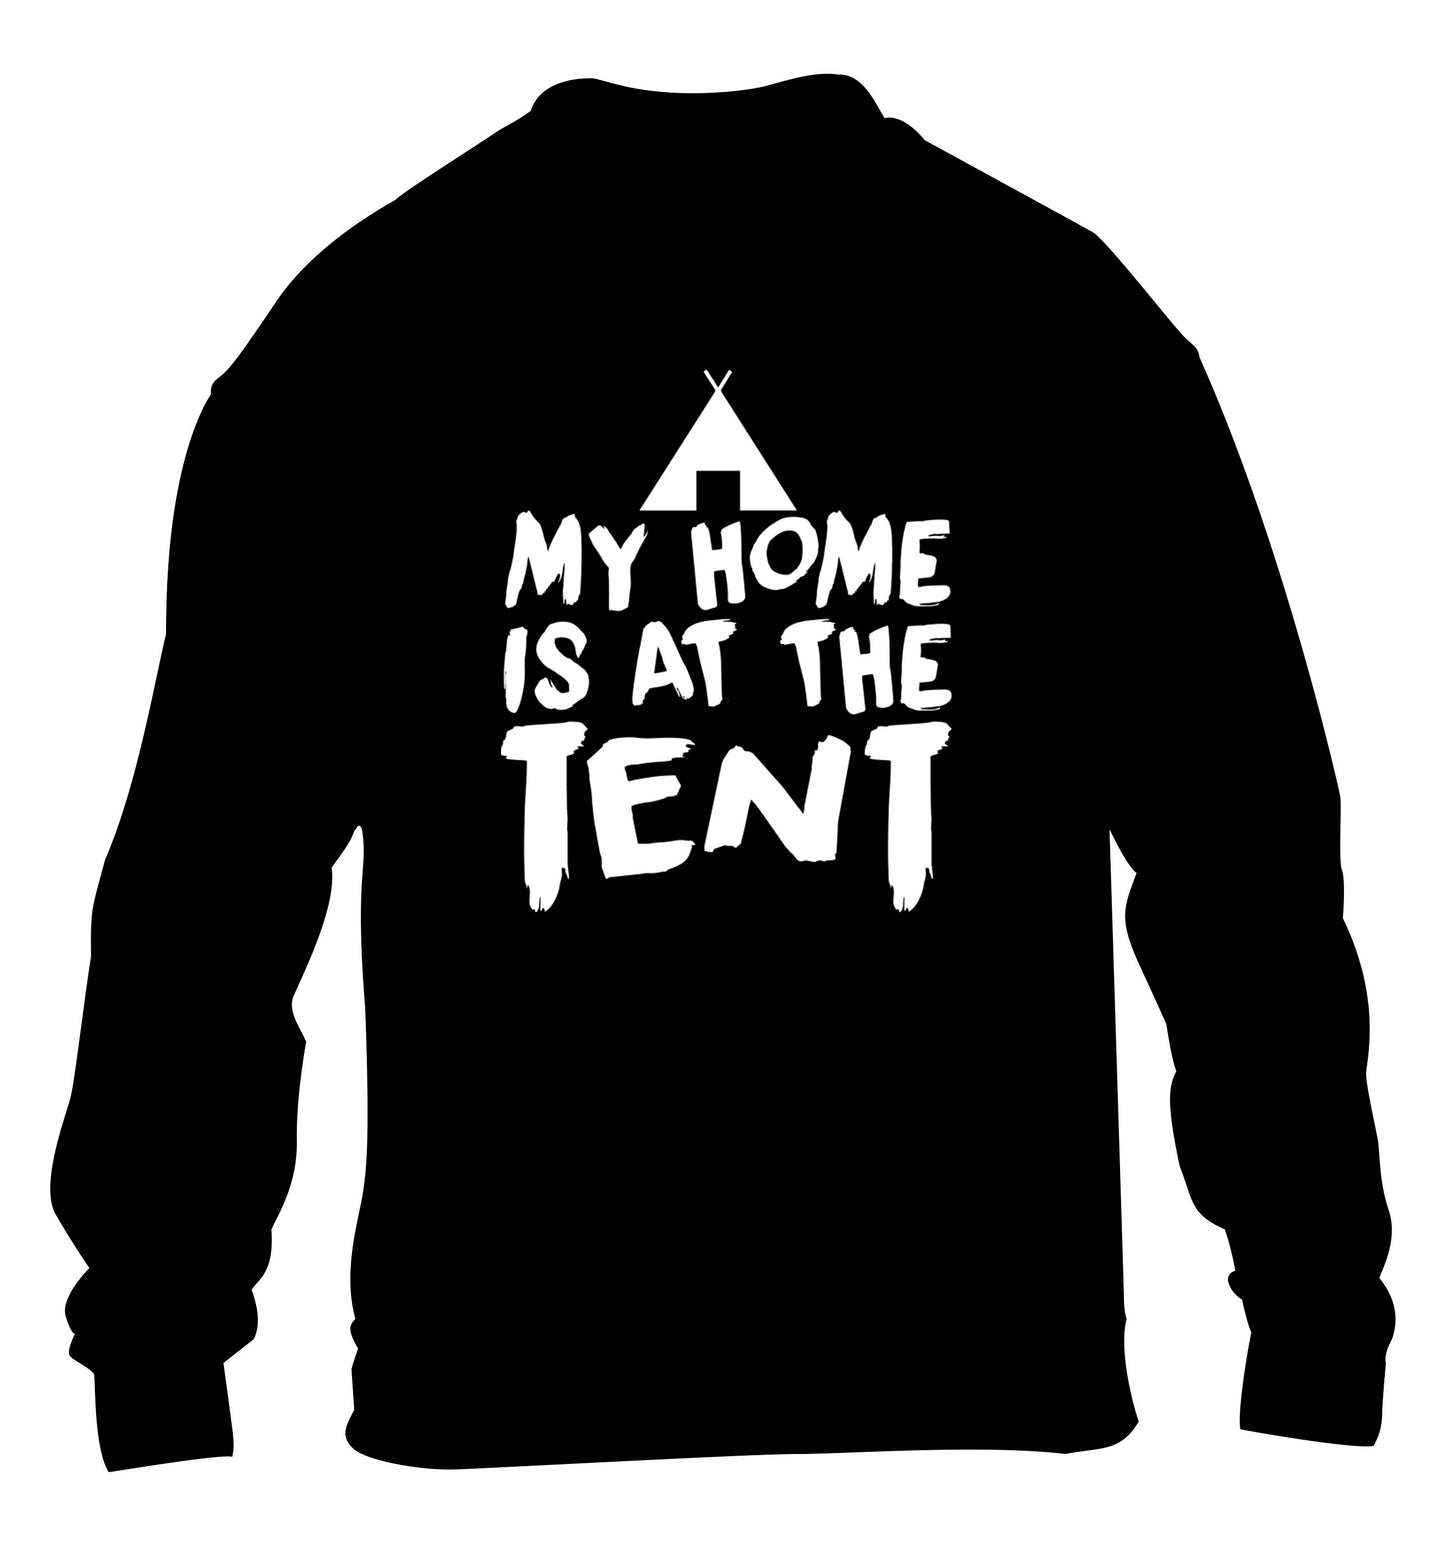 My home is at the tent children's black sweater 12-14 Years